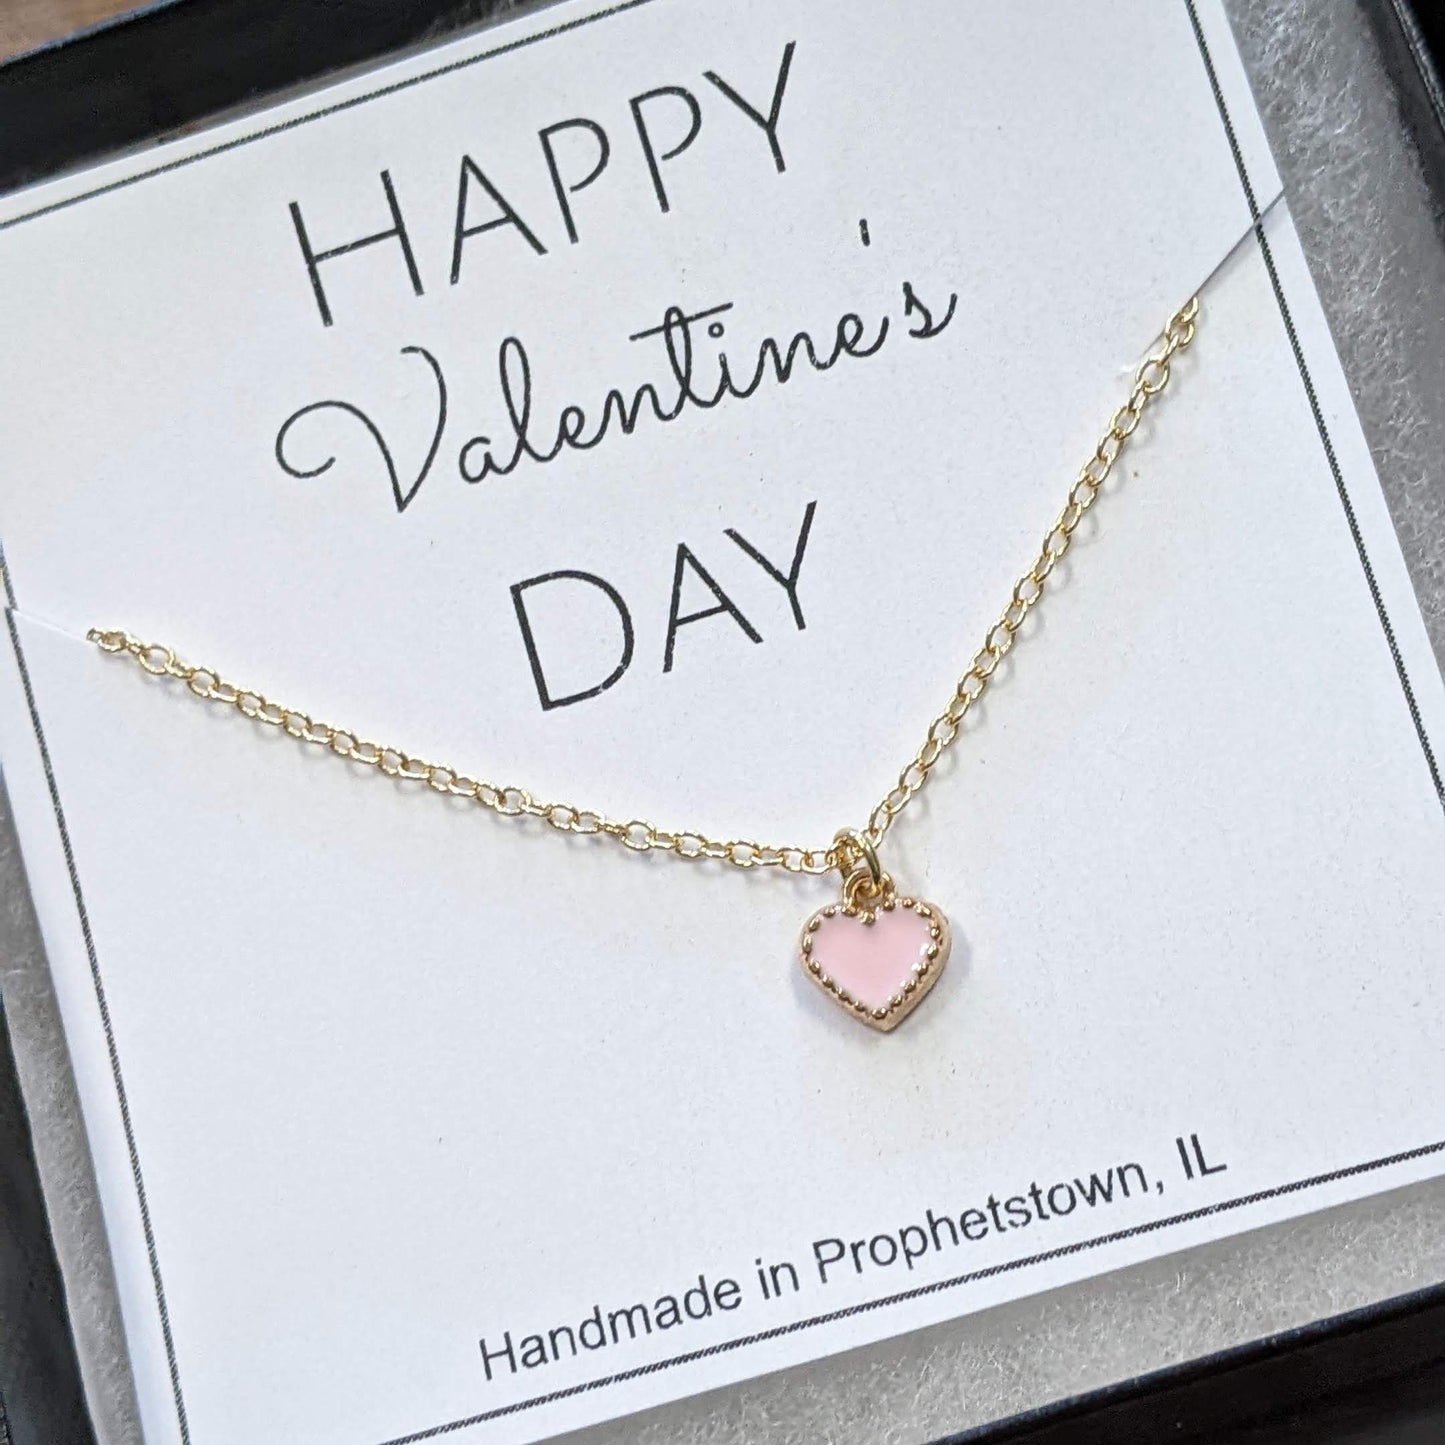 Mini Heart Charm Gold Necklace